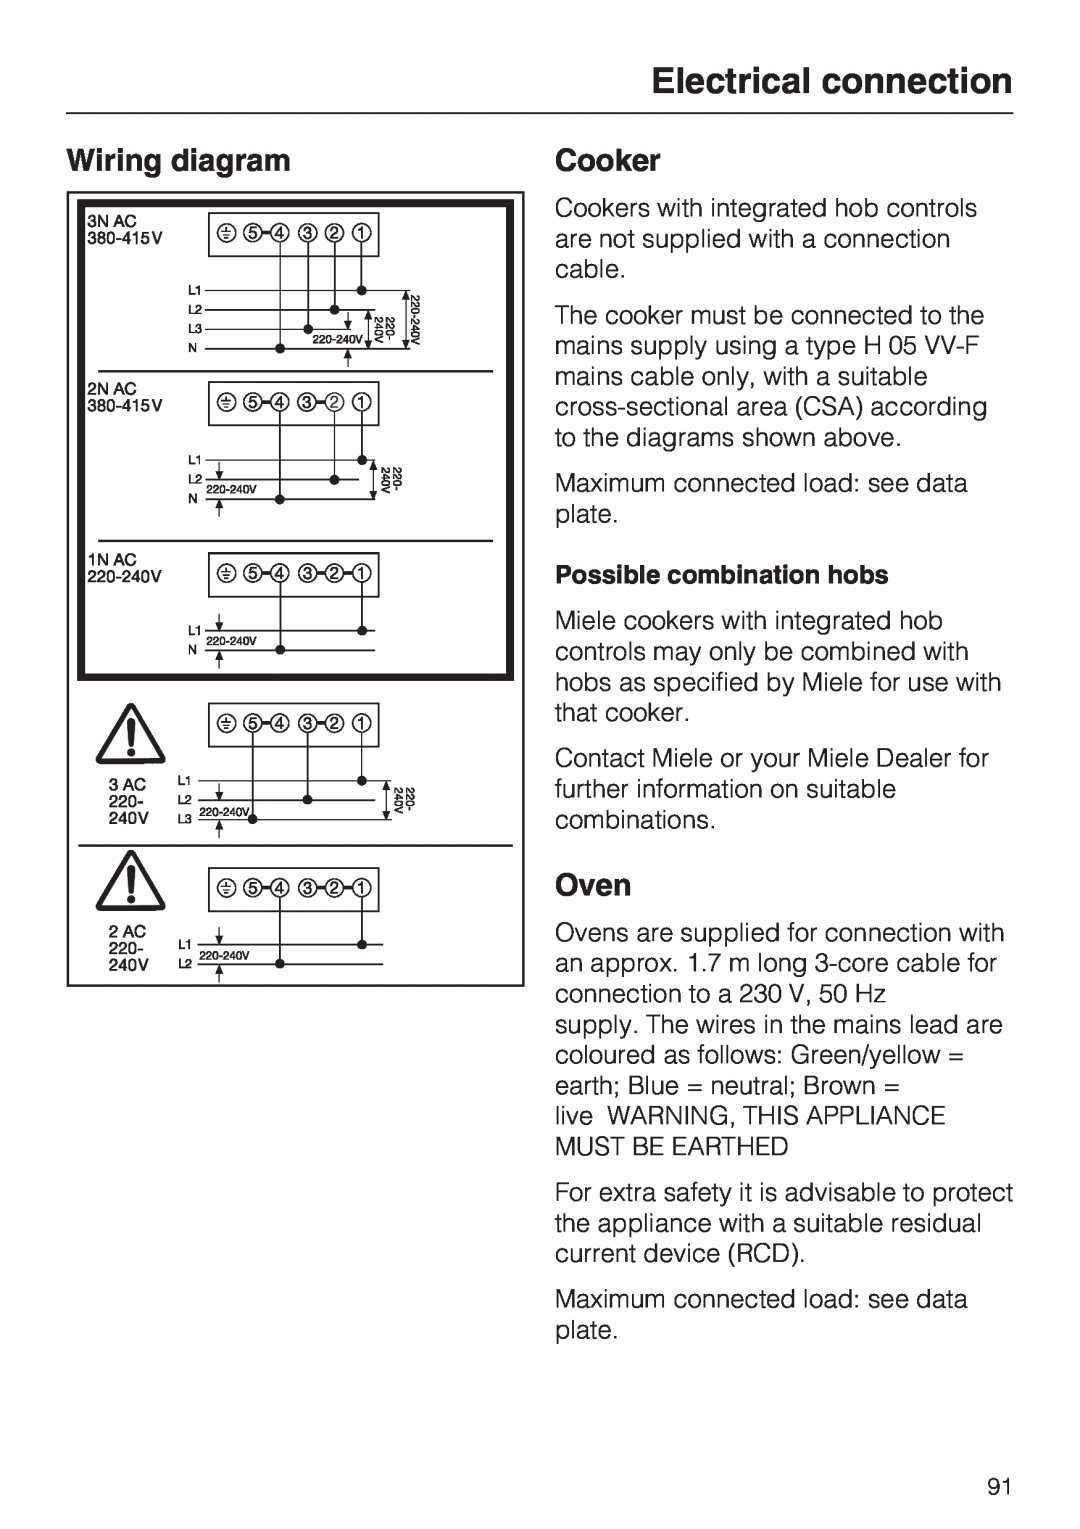 Miele 10 102 470 installation instructions Wiring diagram, Cooker, Oven, Electrical connection, Possible combination hobs 